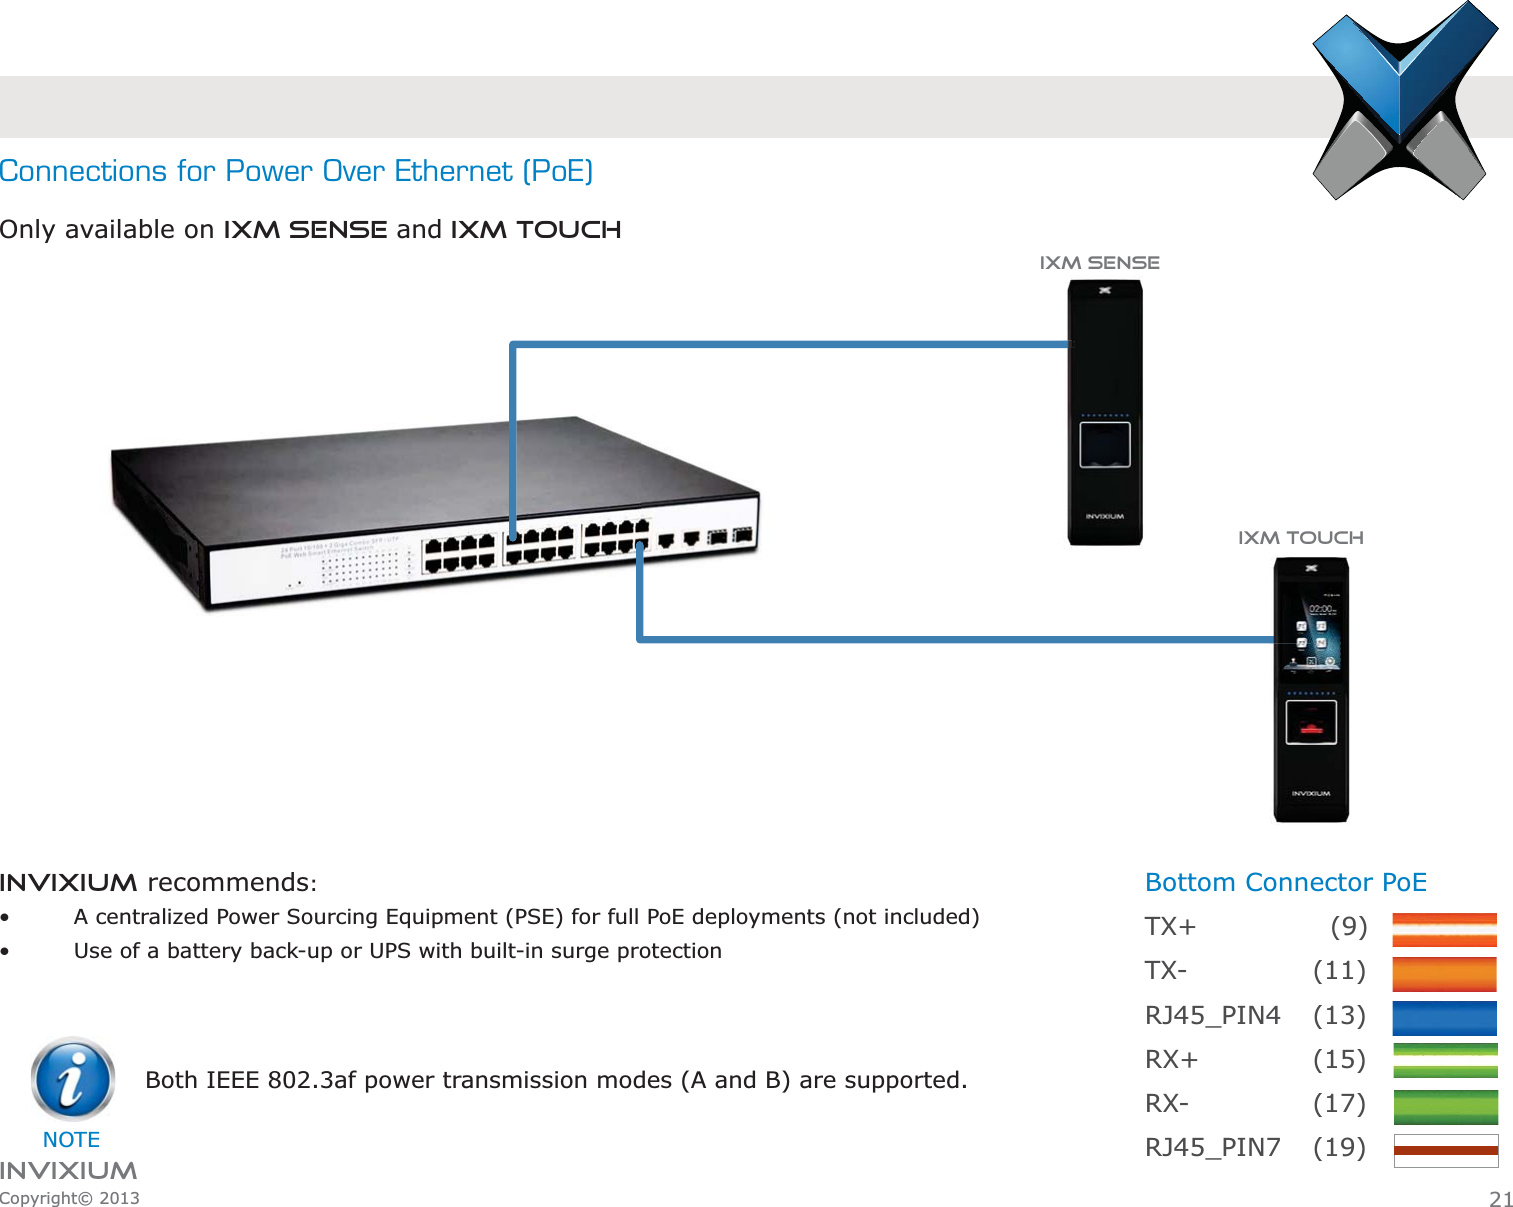 INVIXIUMCopyright© 2013INVIXIUM recommends: A centralized Power Sourcing Equipment (PSE) for full PoE deployments (not included) Use of a battery back-up or UPS with built-in surge protectionOnly available on IXM SENSE and IXM TOUCHConnections for Power Over Ethernet (PoE)Both IEEE 802.3af power transmission modes (A and B) are supported.NOTE21IXM SENSEIXM TOUCHBottom Connector PoETX+        (9) TX-      (11)RJ45_PIN4    (13)RX+      (15)RX-      (17)RJ45_PIN7    (19)